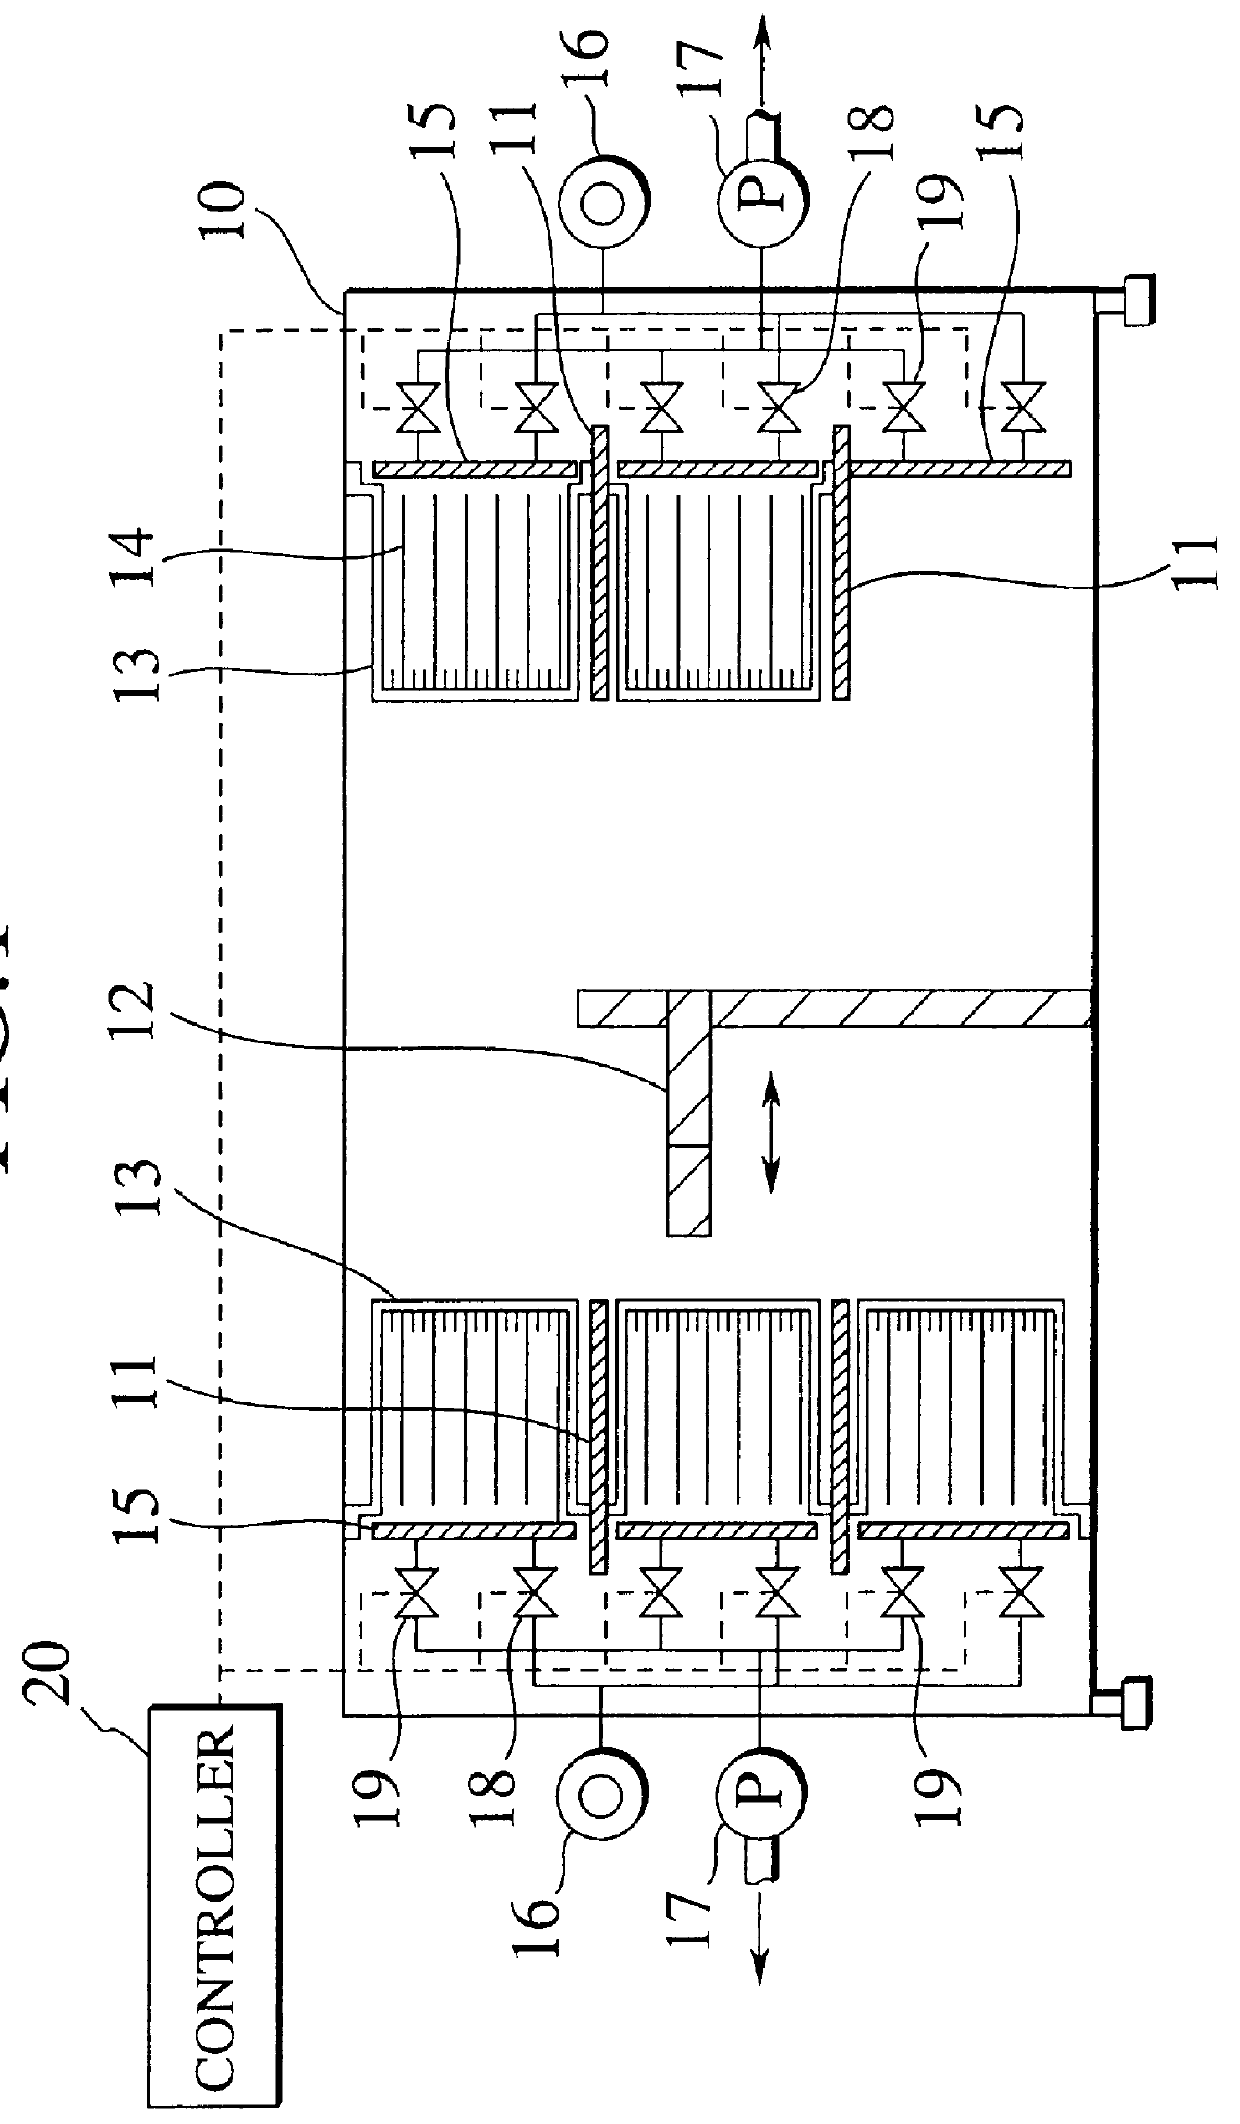 Clean storage equipment for substrates and method of storing substrates